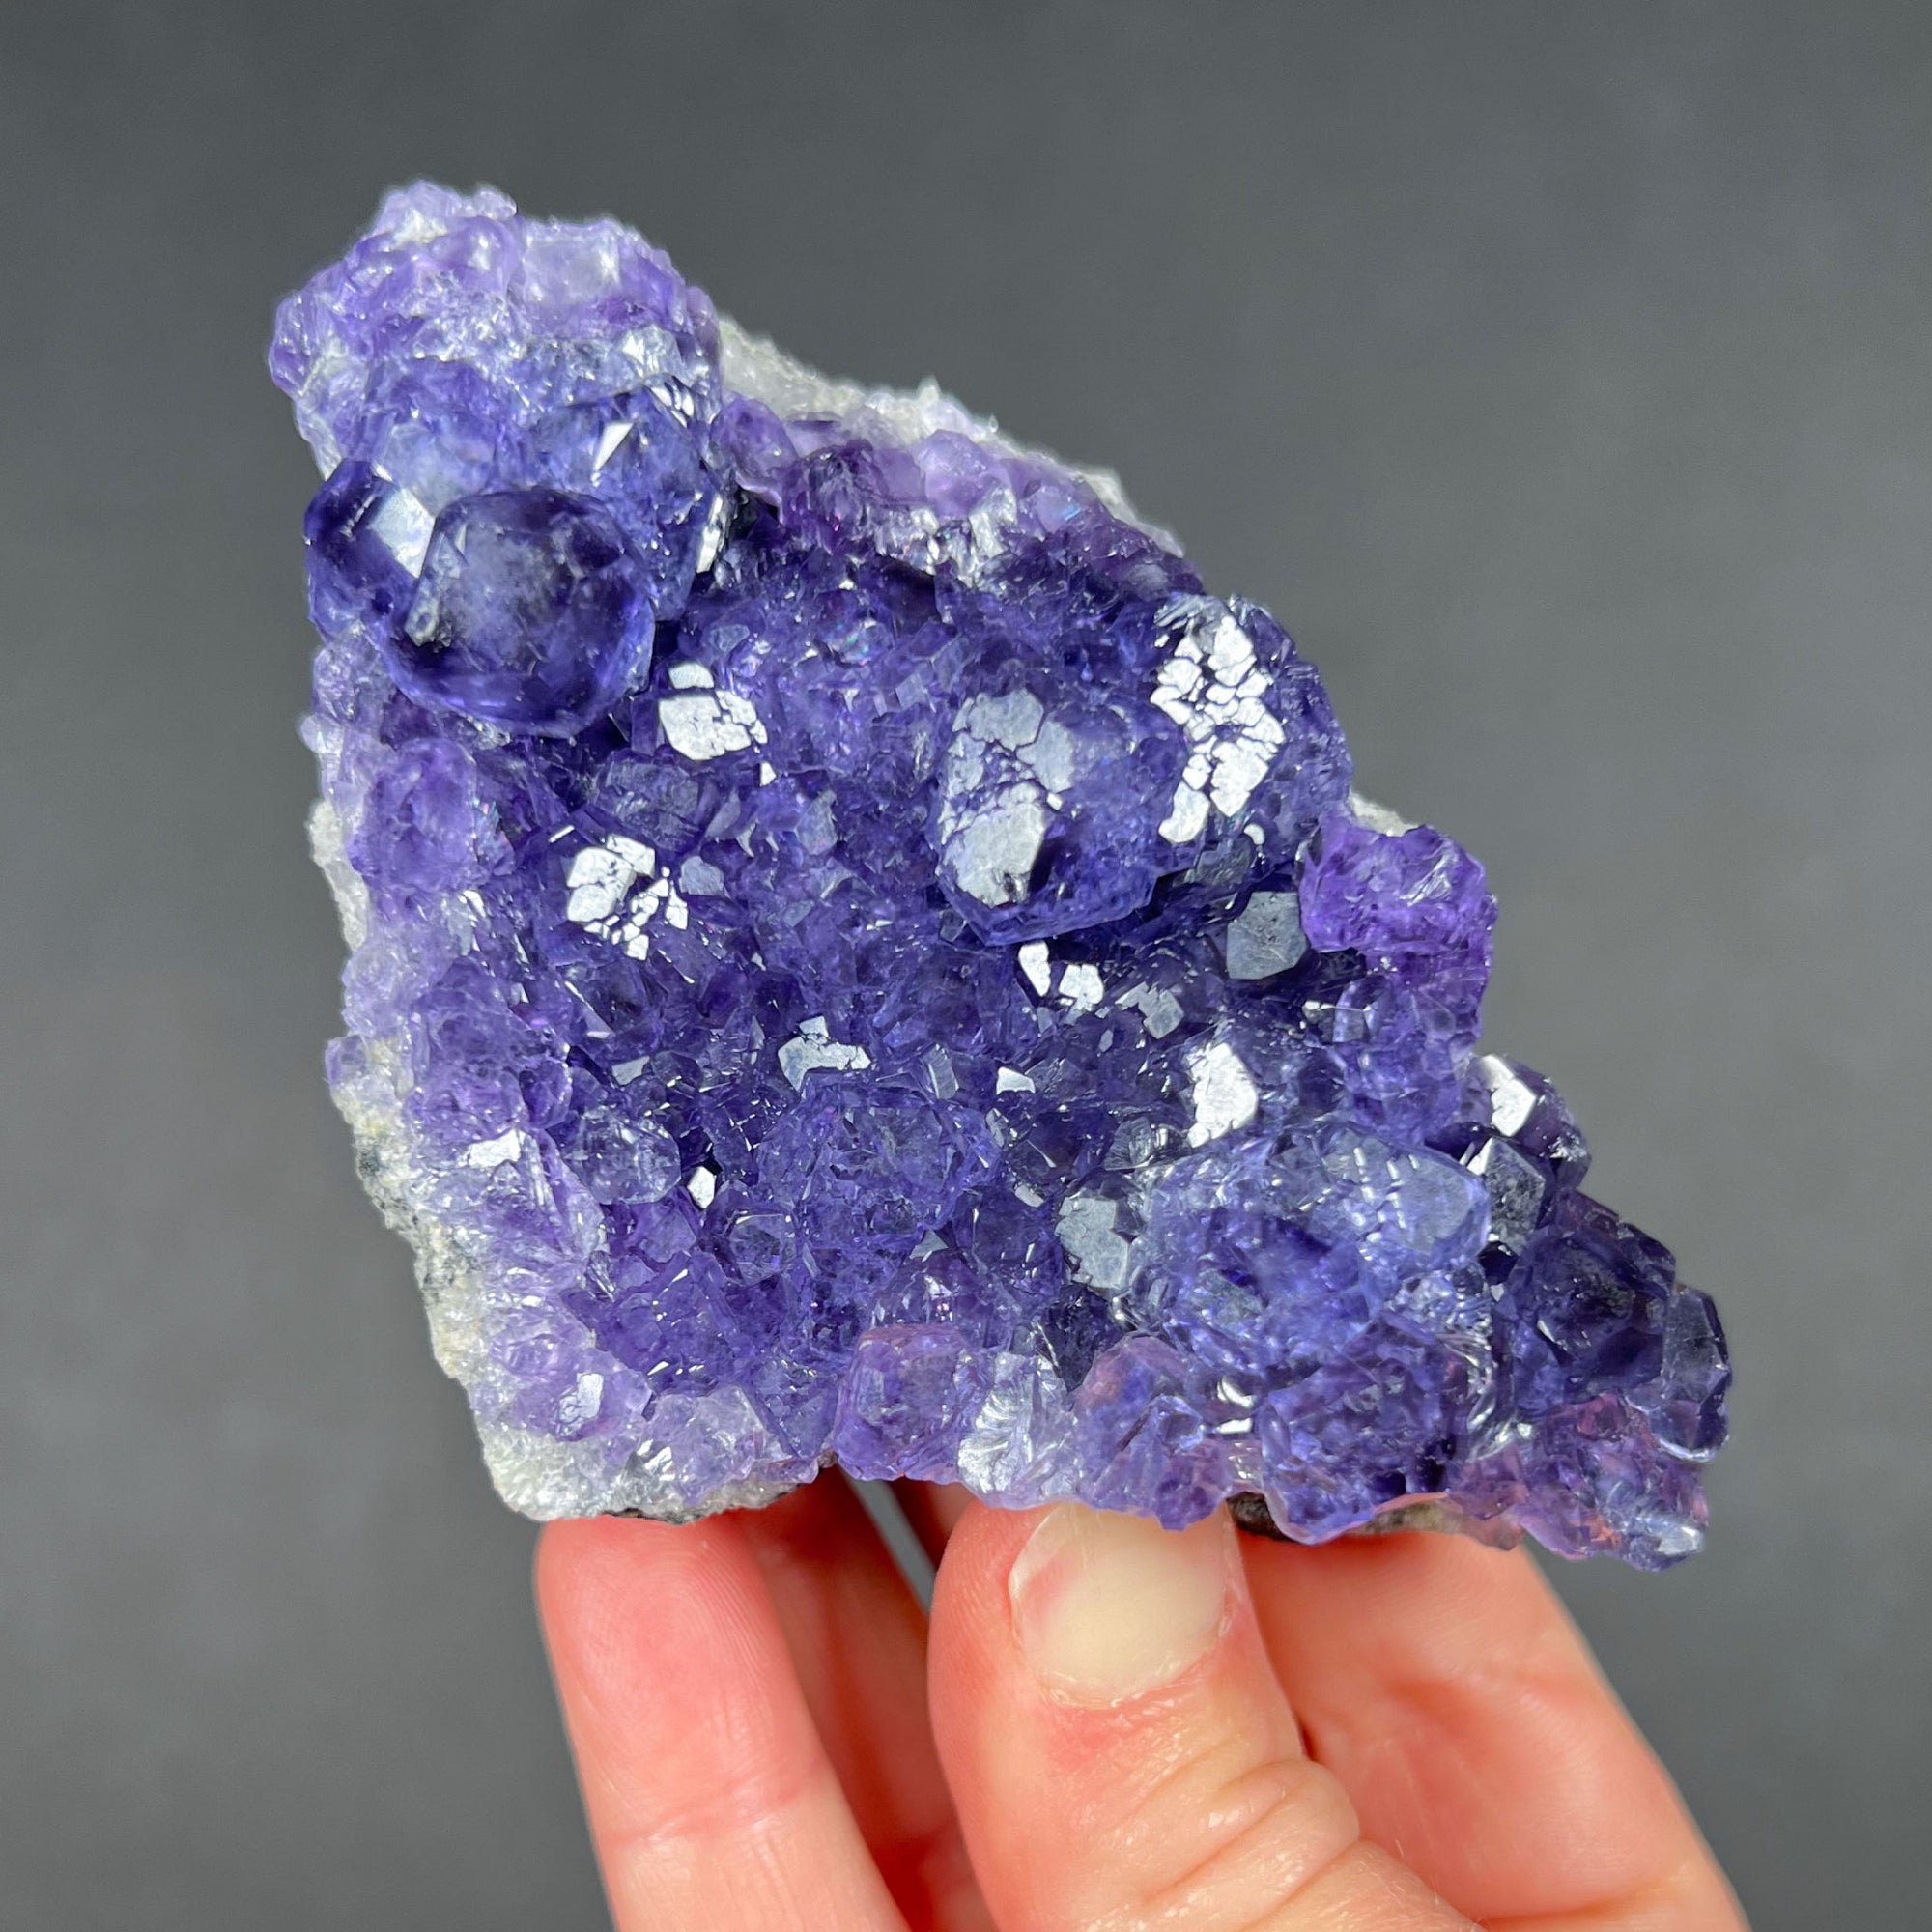 Purple and Blue Crystals of Fluorite from China